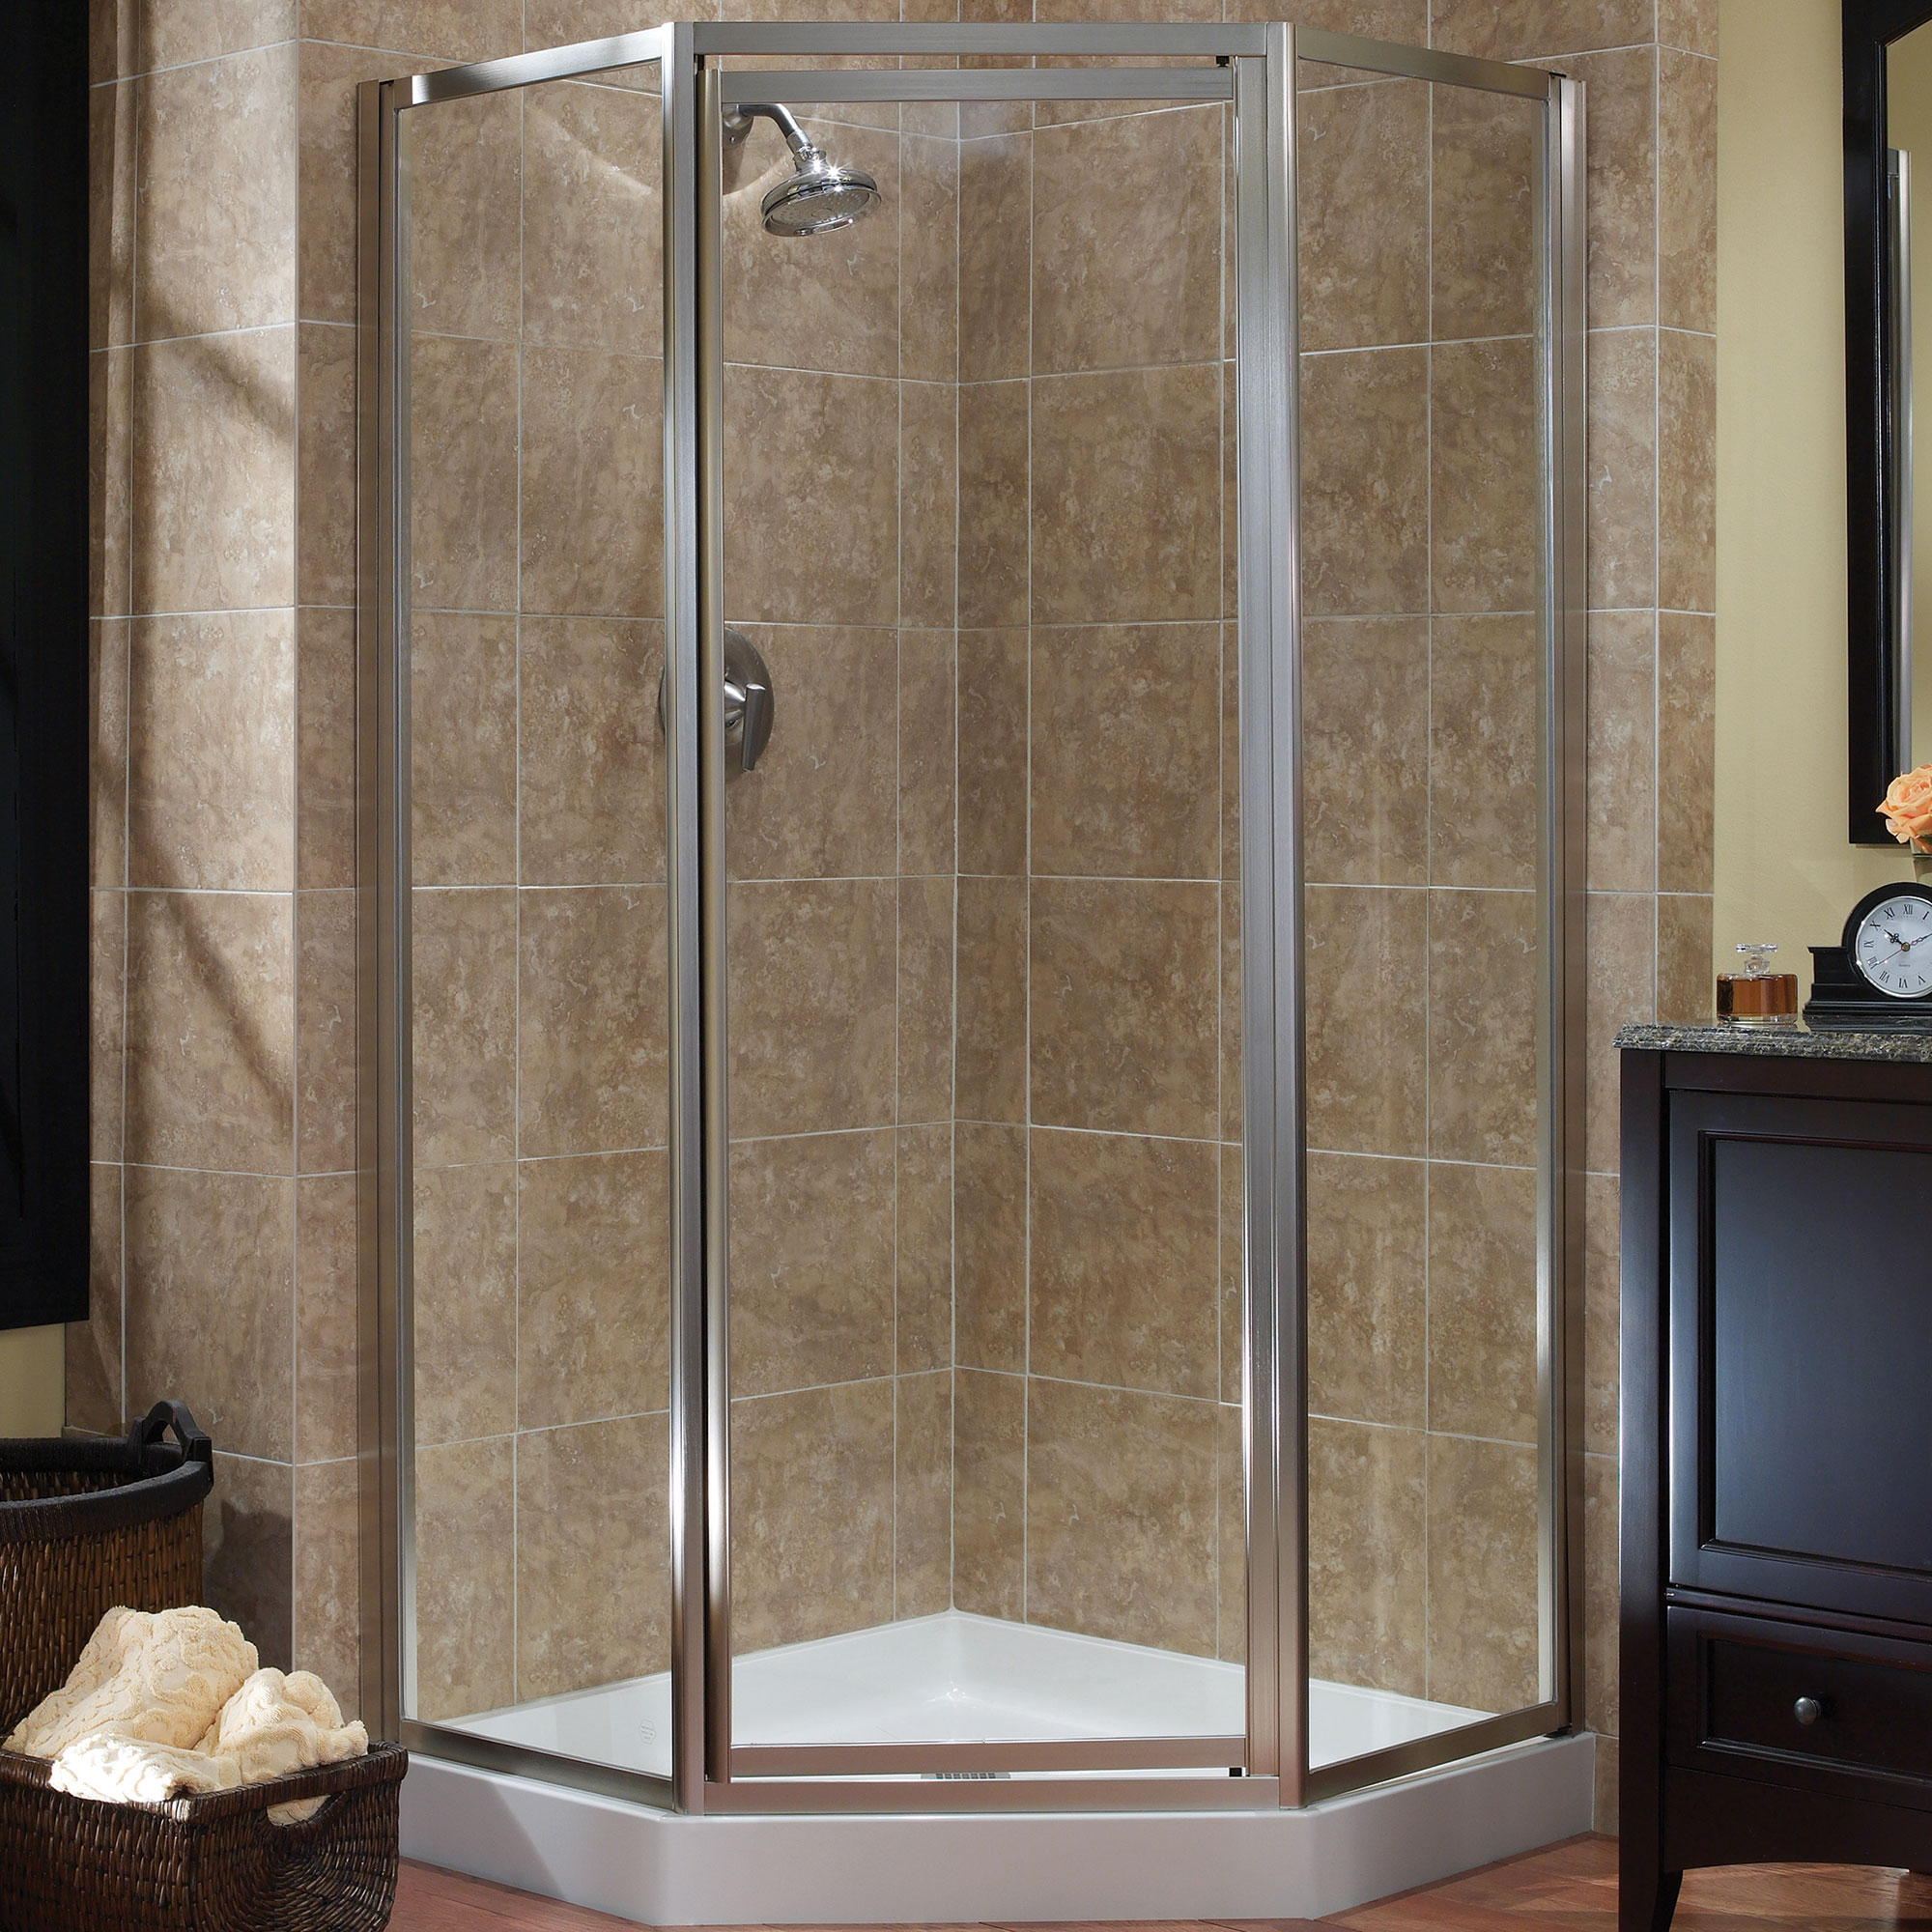 Tides Framed Neo Angle Shower Doors Foremost Bath with dimensions 2000 X 2000